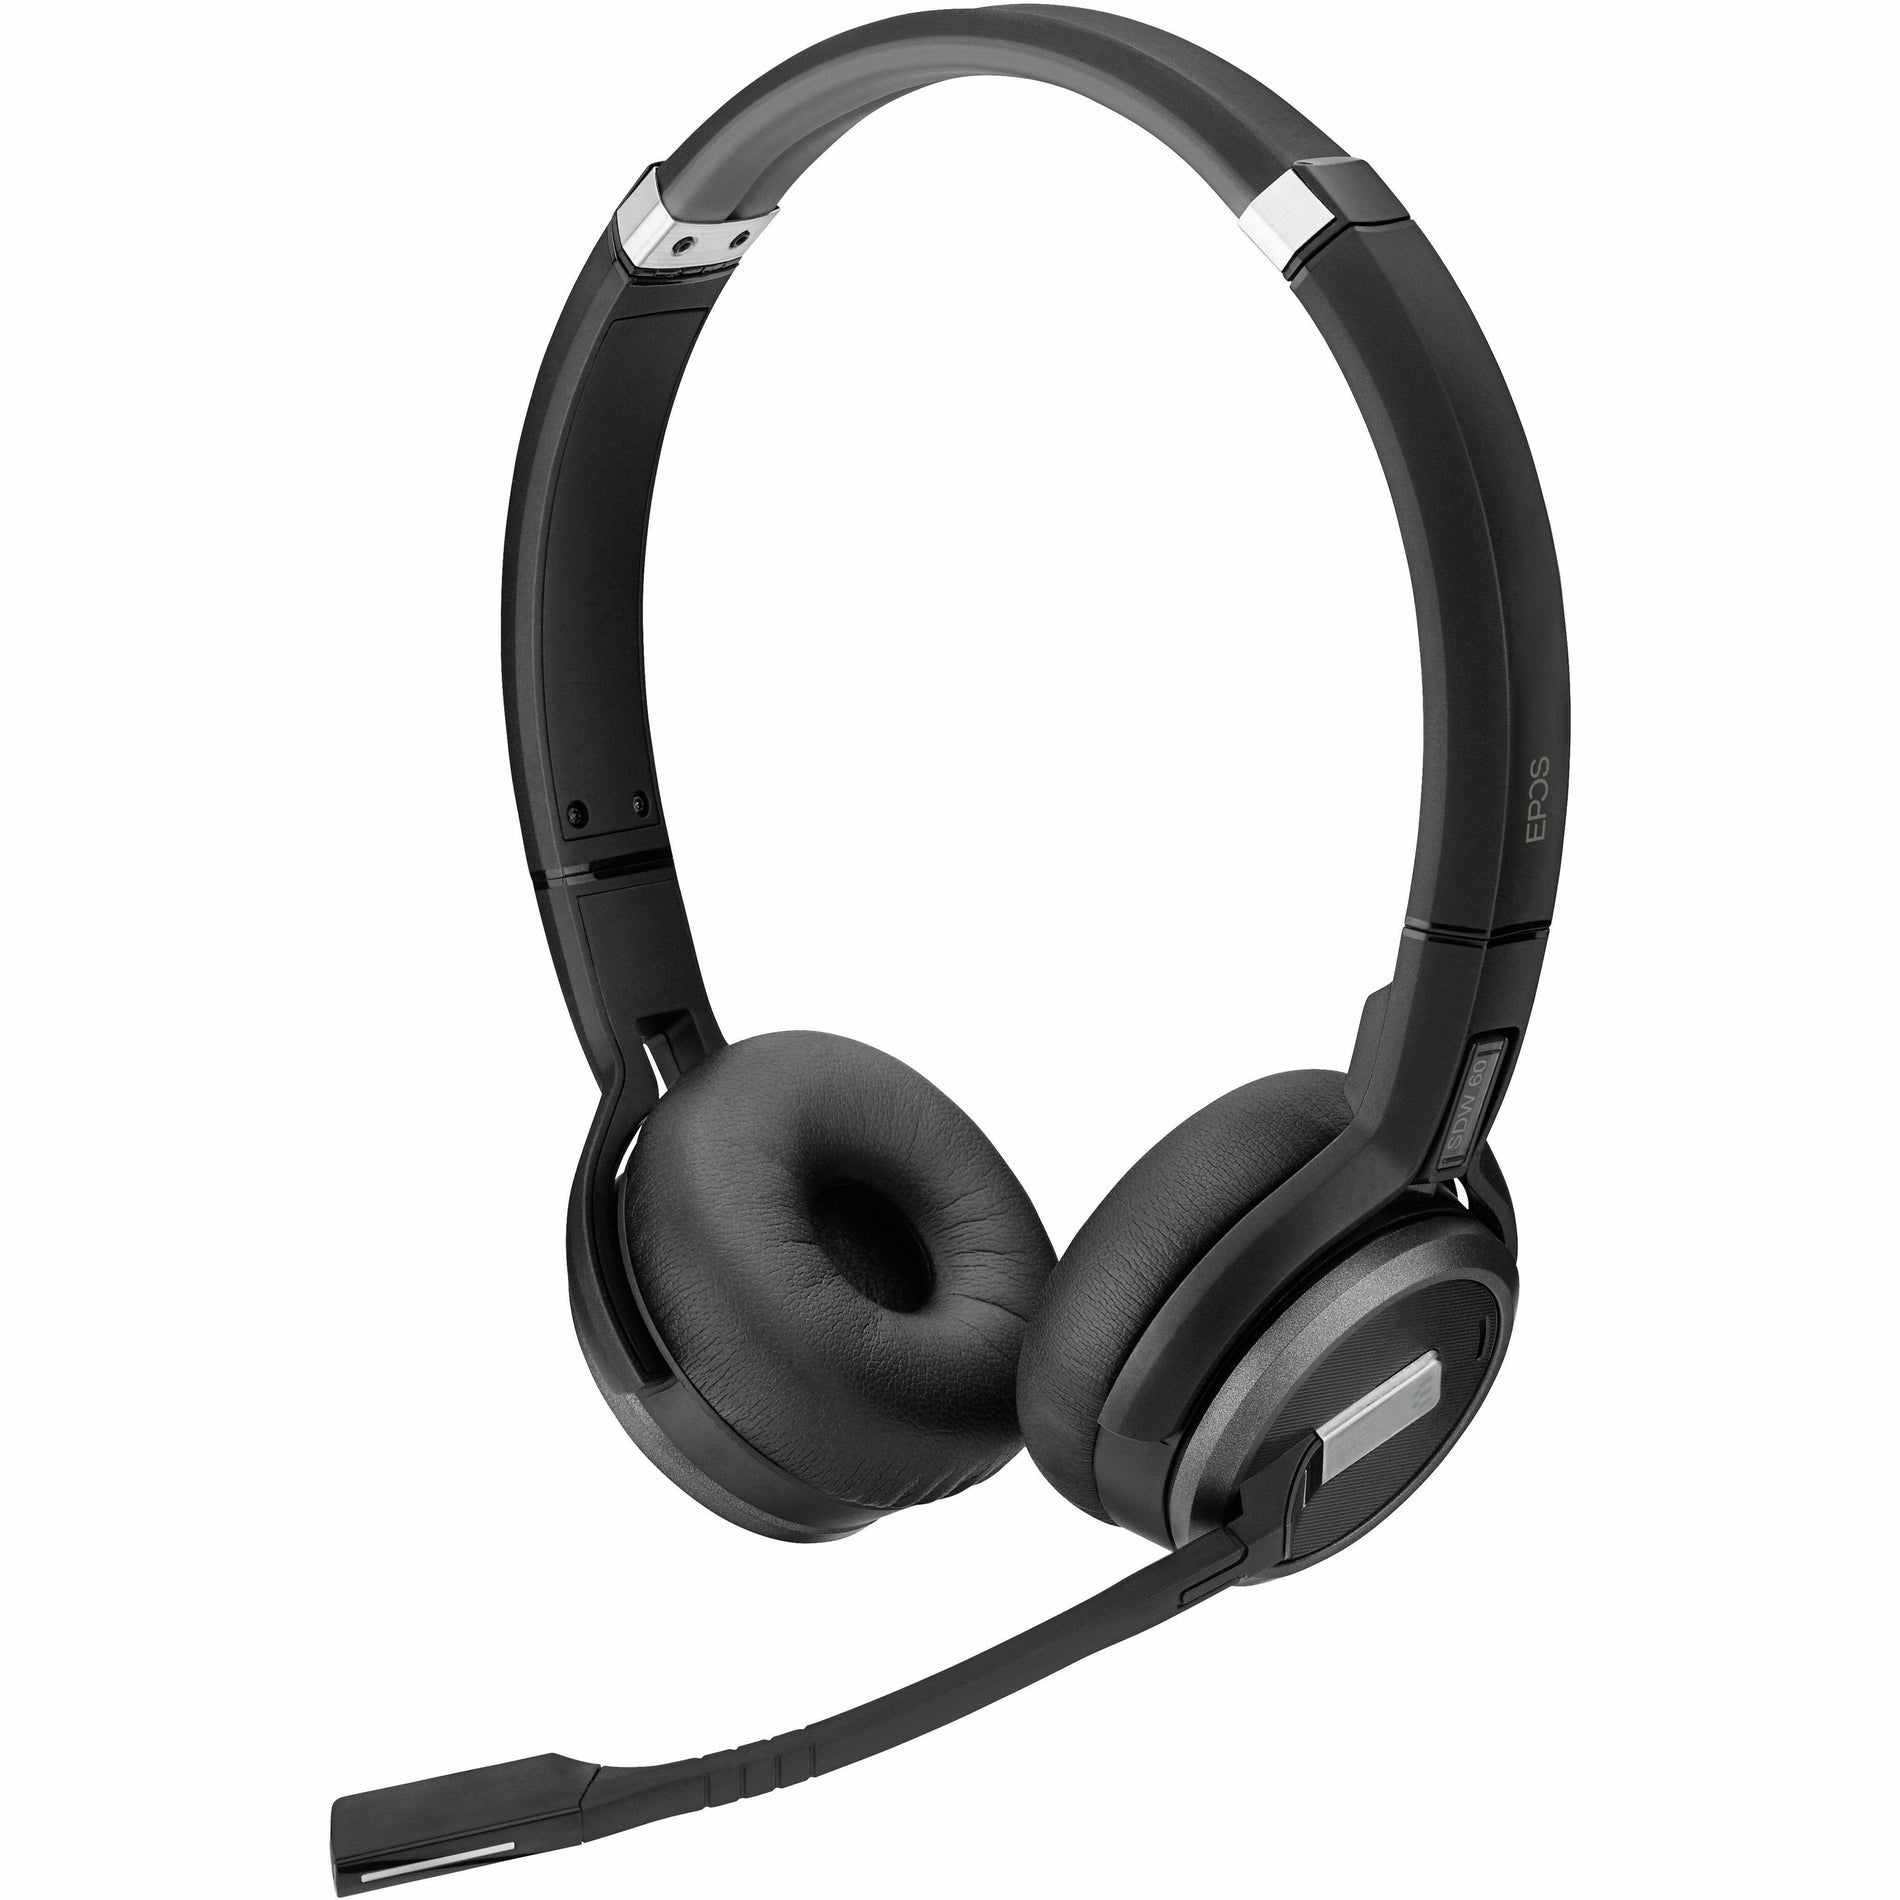 EPOS | SENNHEISER 1000605 IMPACT SDW 5065 - US Headset, Wireless On-ear Stereo Headset with Noise Cancelling and Rechargeable Battery